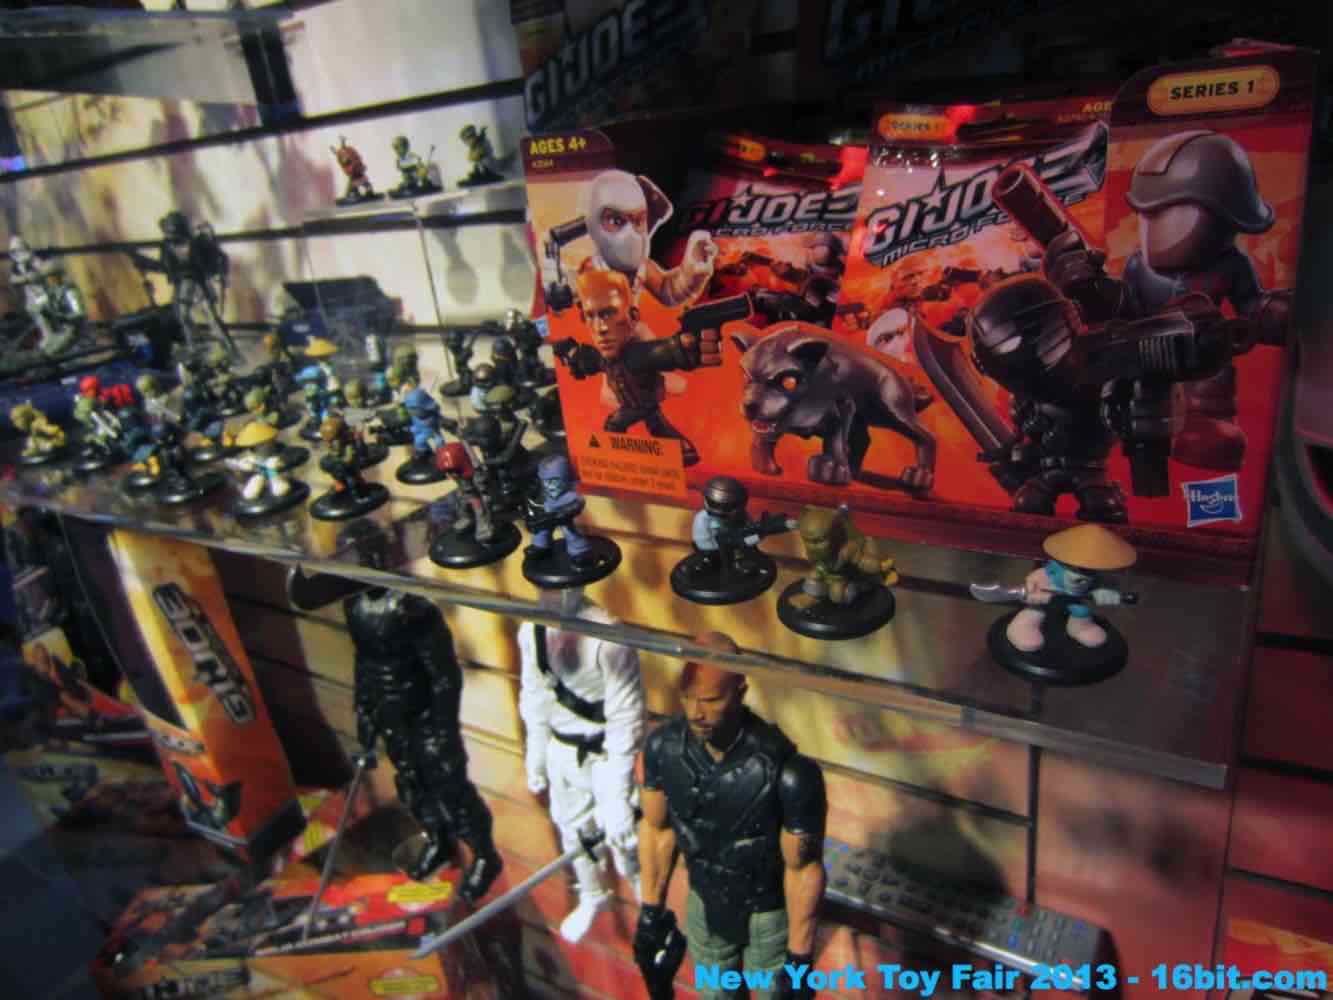 16bit.com: Toy Fair Coverage of G.I. Joe Action Figures and Toys from Adam Pawlus